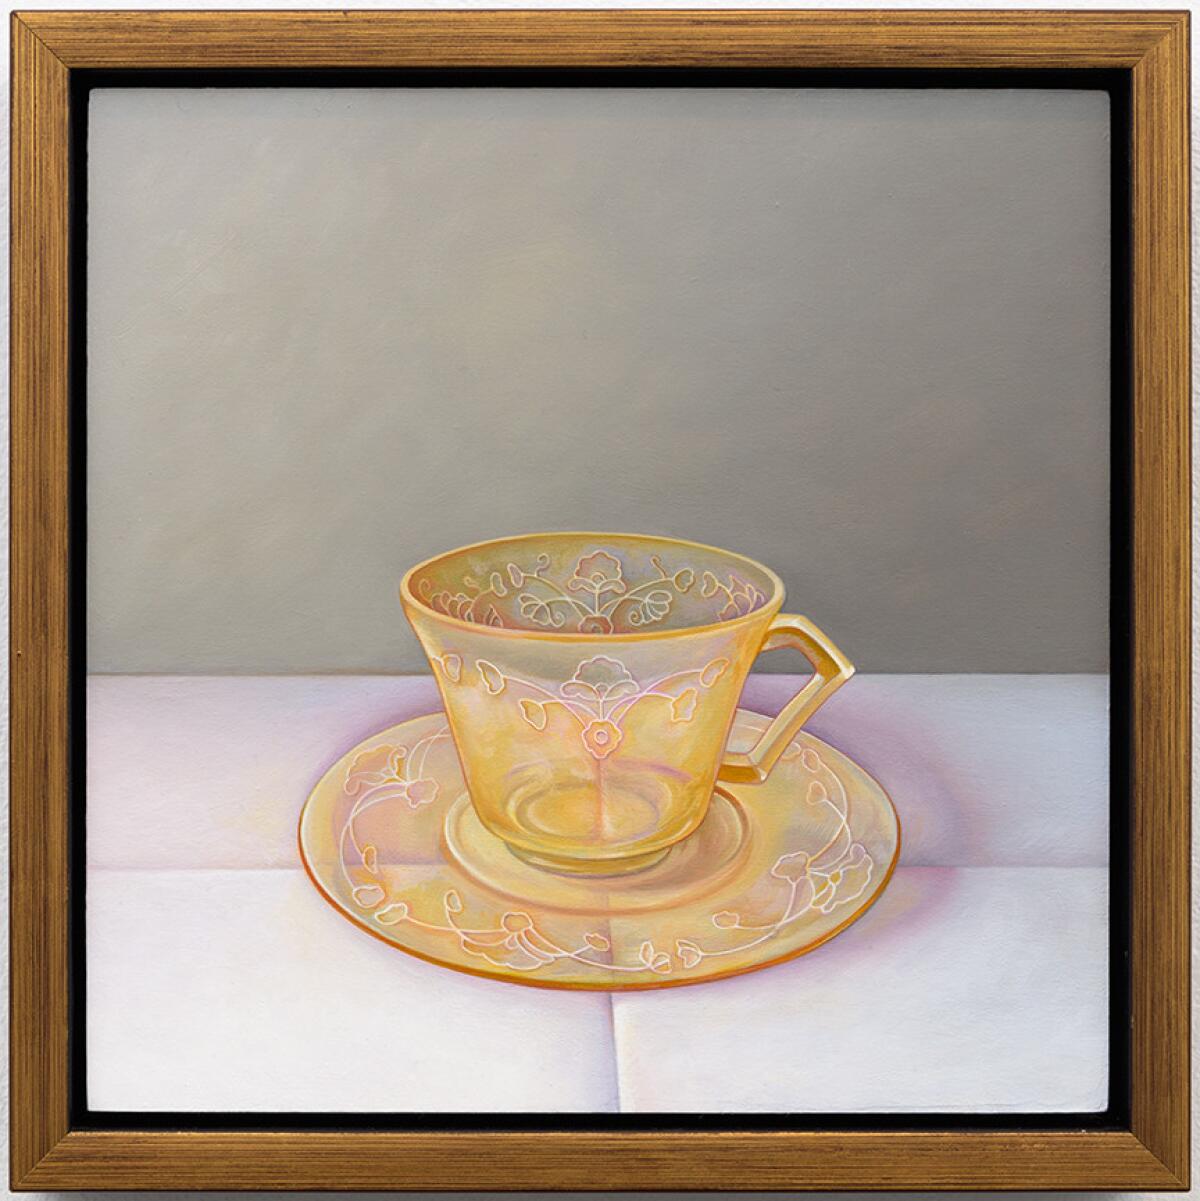 Laura Lasworth's "Depression Glass Tea Cup," 2016, oil on wood panel, 9.25 inches by 9.25 inches framed. (Lora Schlesinger Gallery)